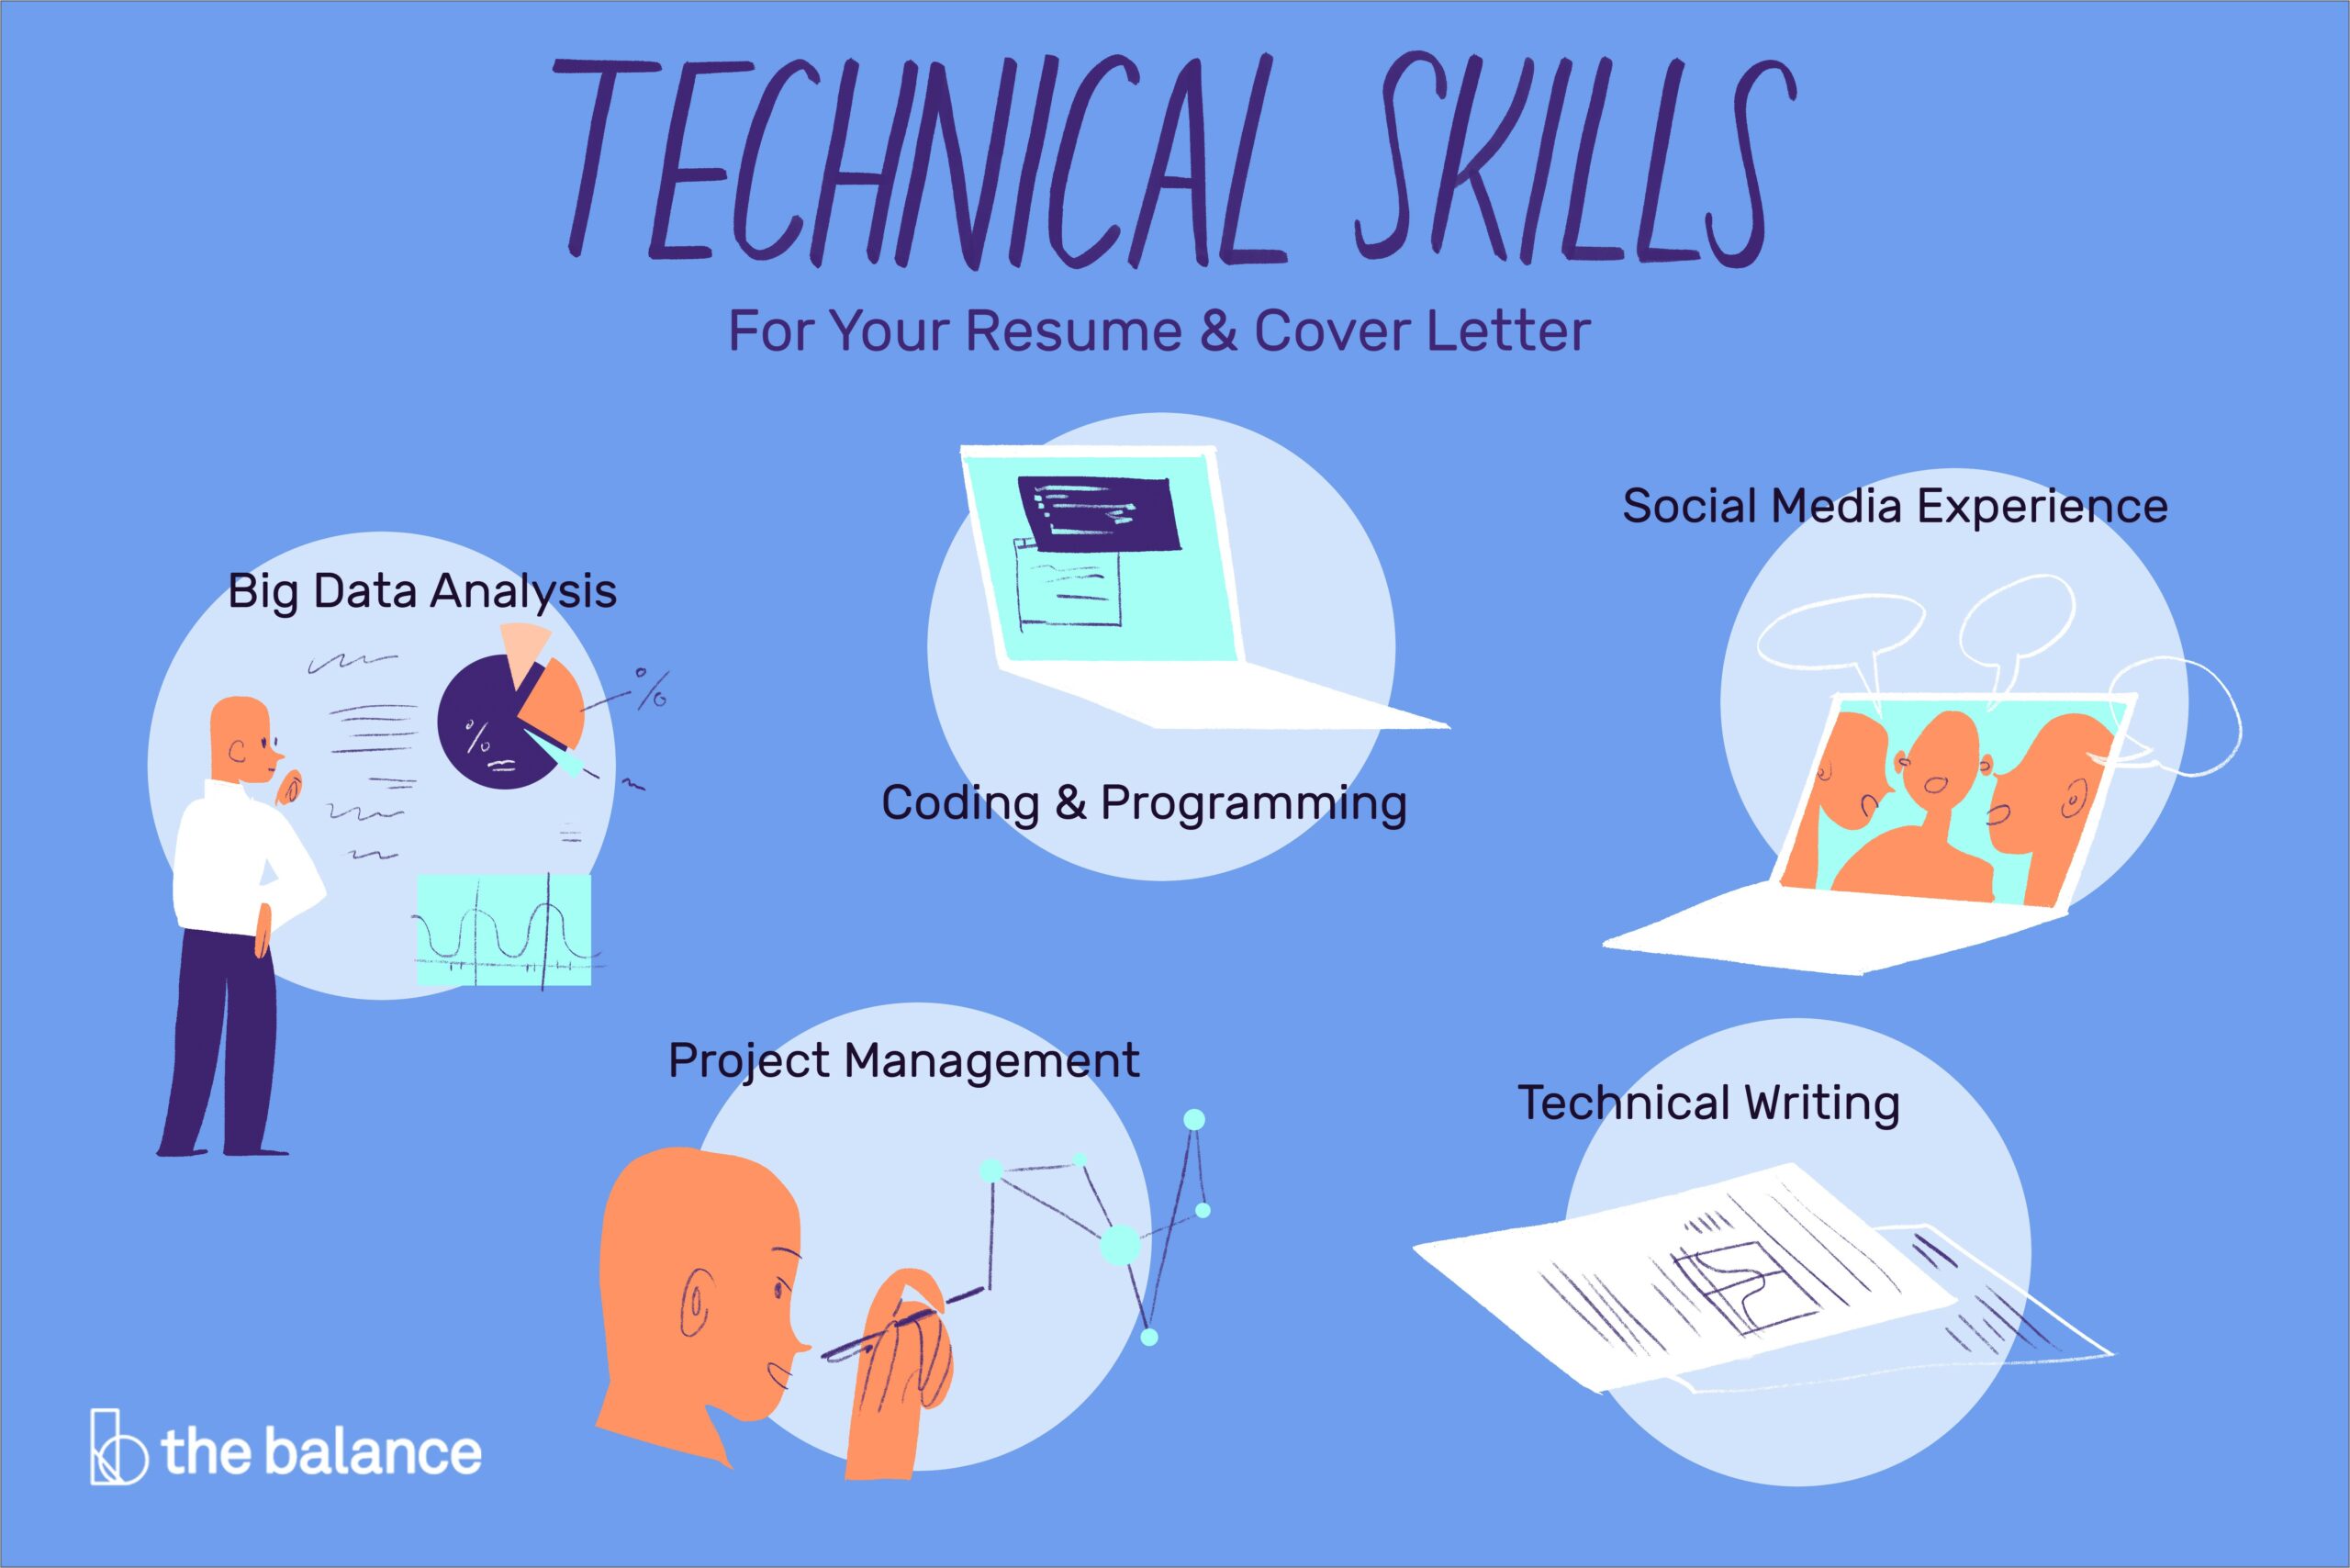 Common Technical Skills To List On Resume